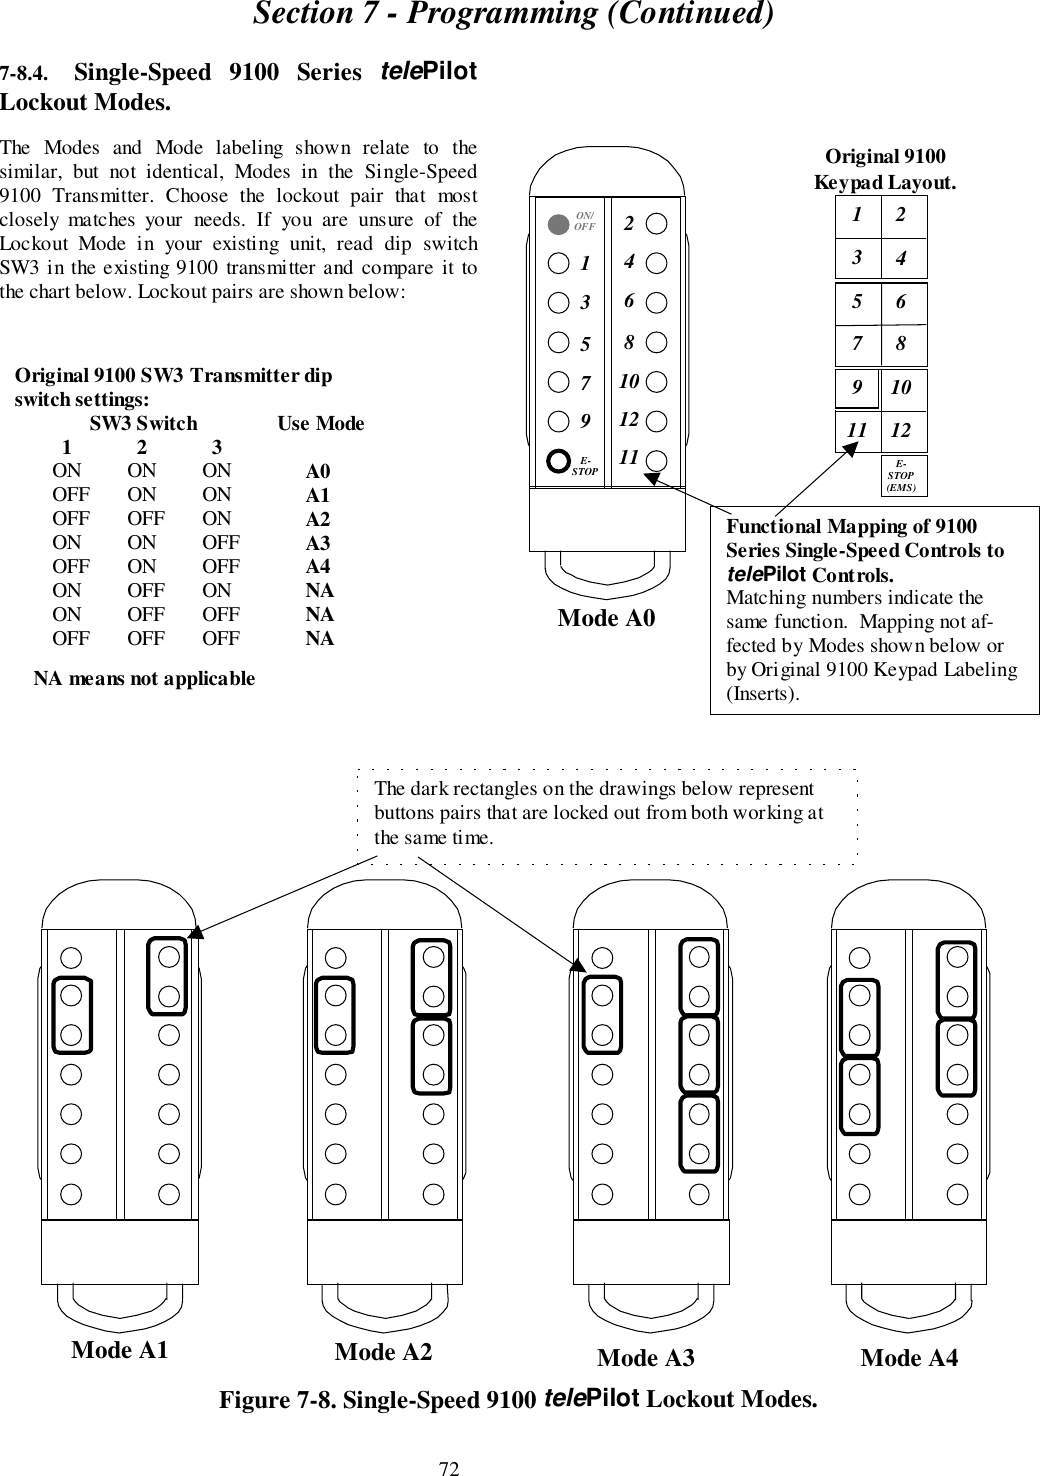 Section 7 - Programming (Continued)727-8.4. Single-Speed 9100 Series telePilotLockout Modes.The Modes and Mode labeling shown relate to thesimilar, but not identical, Modes in the Single-Speed9100 Transmitter. Choose the lockout pair that mostclosely matches your needs. If you are unsure of theLockout Mode in your existing unit, read dip switchSW3 in the existing 9100 transmitter and compare it tothe chart below. Lockout pairs are shown below:Figure 7-8. Single-Speed 9100 telePilot Lockout Modes.Mode A1 Mode A2 Mode A3 Mode A4The dark rectangles on the drawings below representbuttons pairs that are locked out from both working atthe same ti me.Original 9100 SW3 Transmitter dipswitch settings:SW3 Switch  Use Mode123ON ON ON A0OFF ON ON A1OFF OFF ON A2ON ON OFF A3OFF ON OFF A4ON OFF ON NAON OFF OFF NAOFF OFF OFF NANA means not applicableMode A0ON/OFF13579E-STOP246810121124681012E-STOP(EMS)1357911Functional Mapping of 9100Series Single-Speed Controls totelePilot Controls.Matching numbers indicate thesame function.  Mapping not af-fected by Modes shown below orby Original 9100 Keypad Labeling(Inserts).Original 9100Keypad Layout.